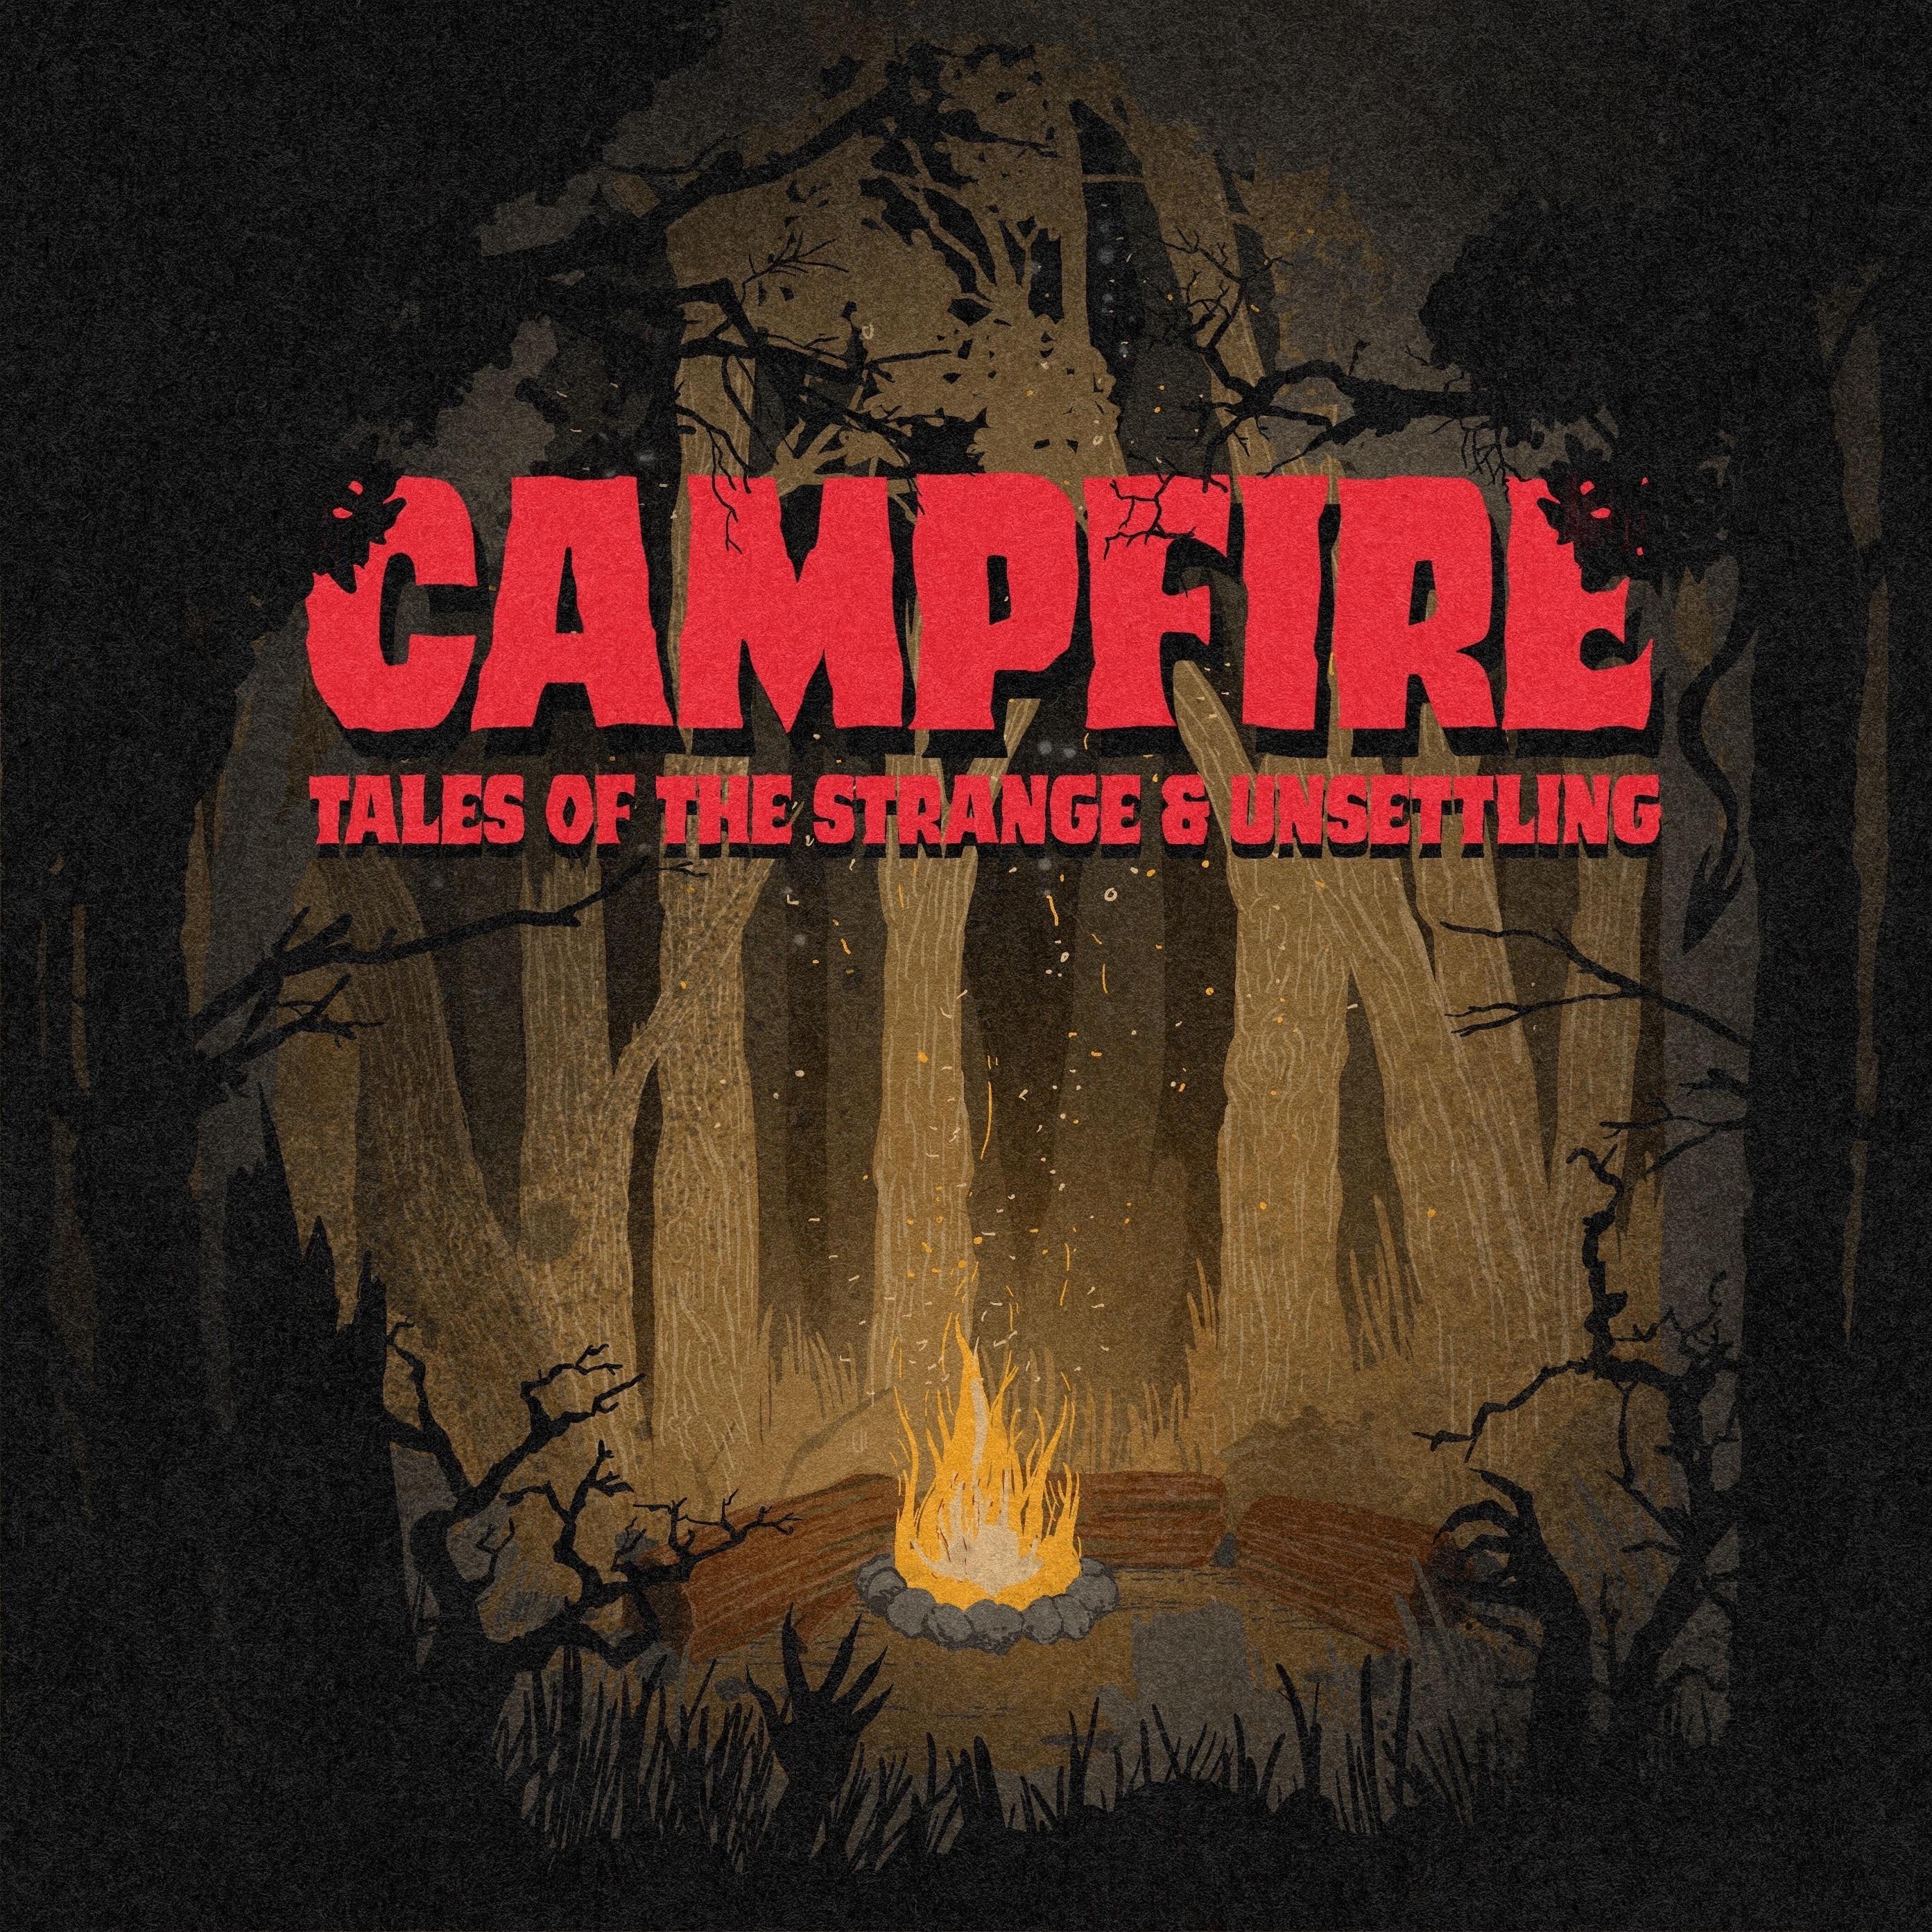 Campfire: Tales of the Strange and Unsettling